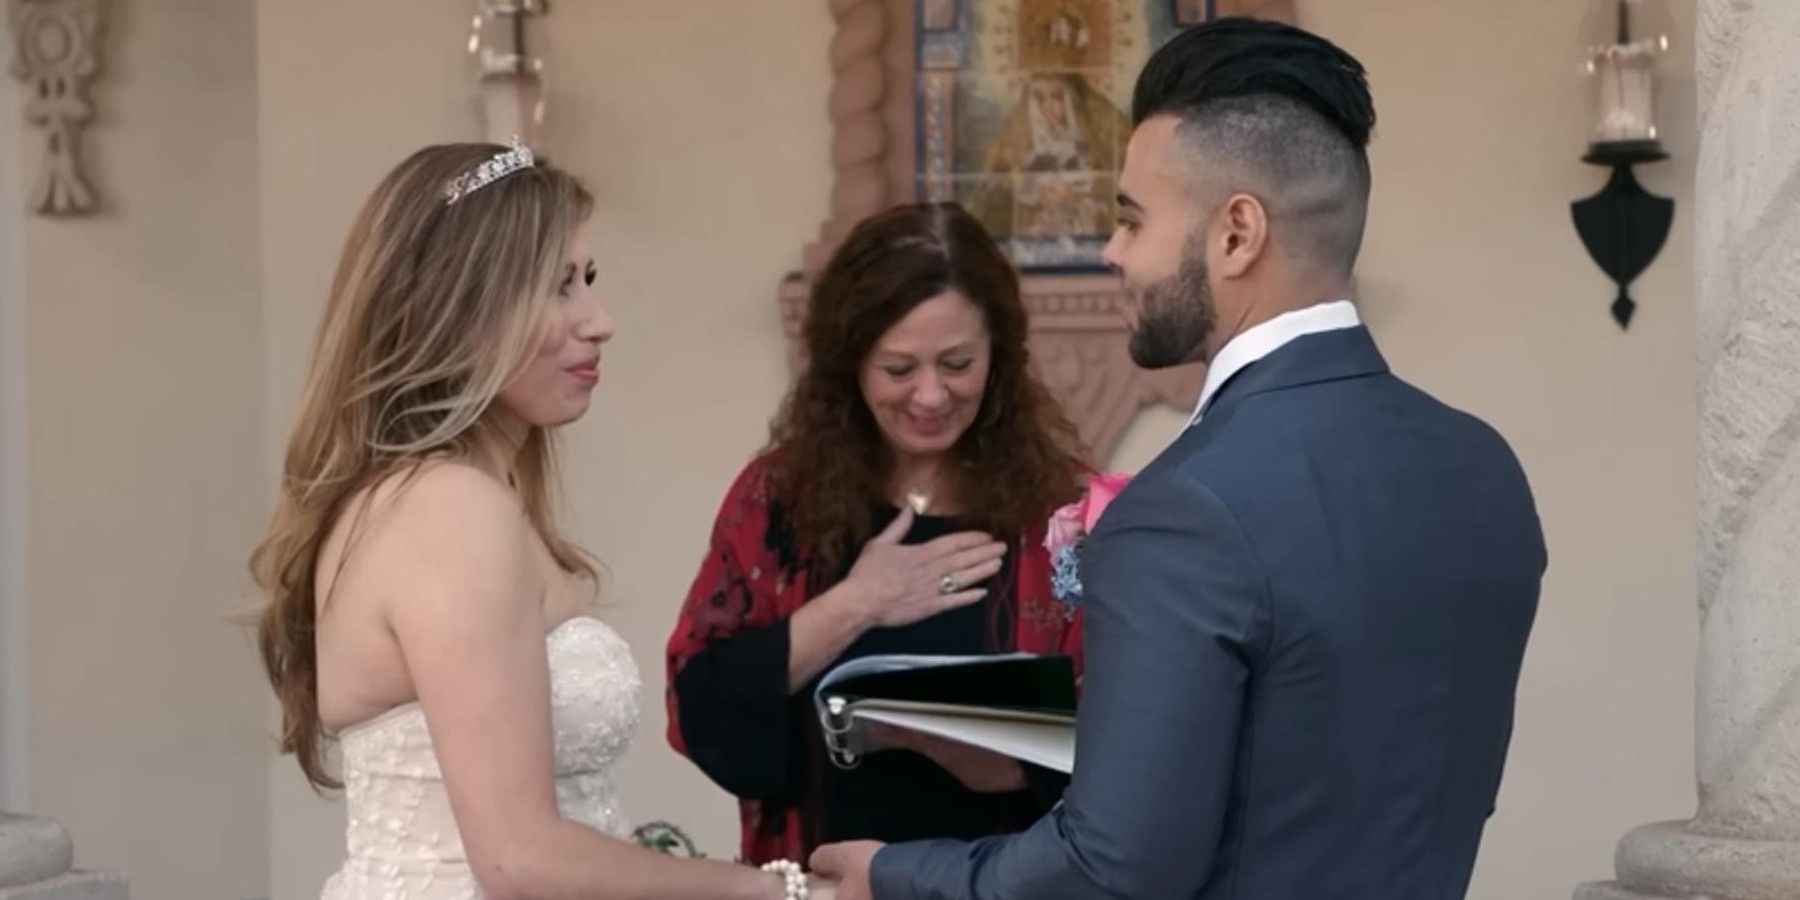 90 Day Fiancé stars Yve Arellano and Mohamed Abdelhamed getting married